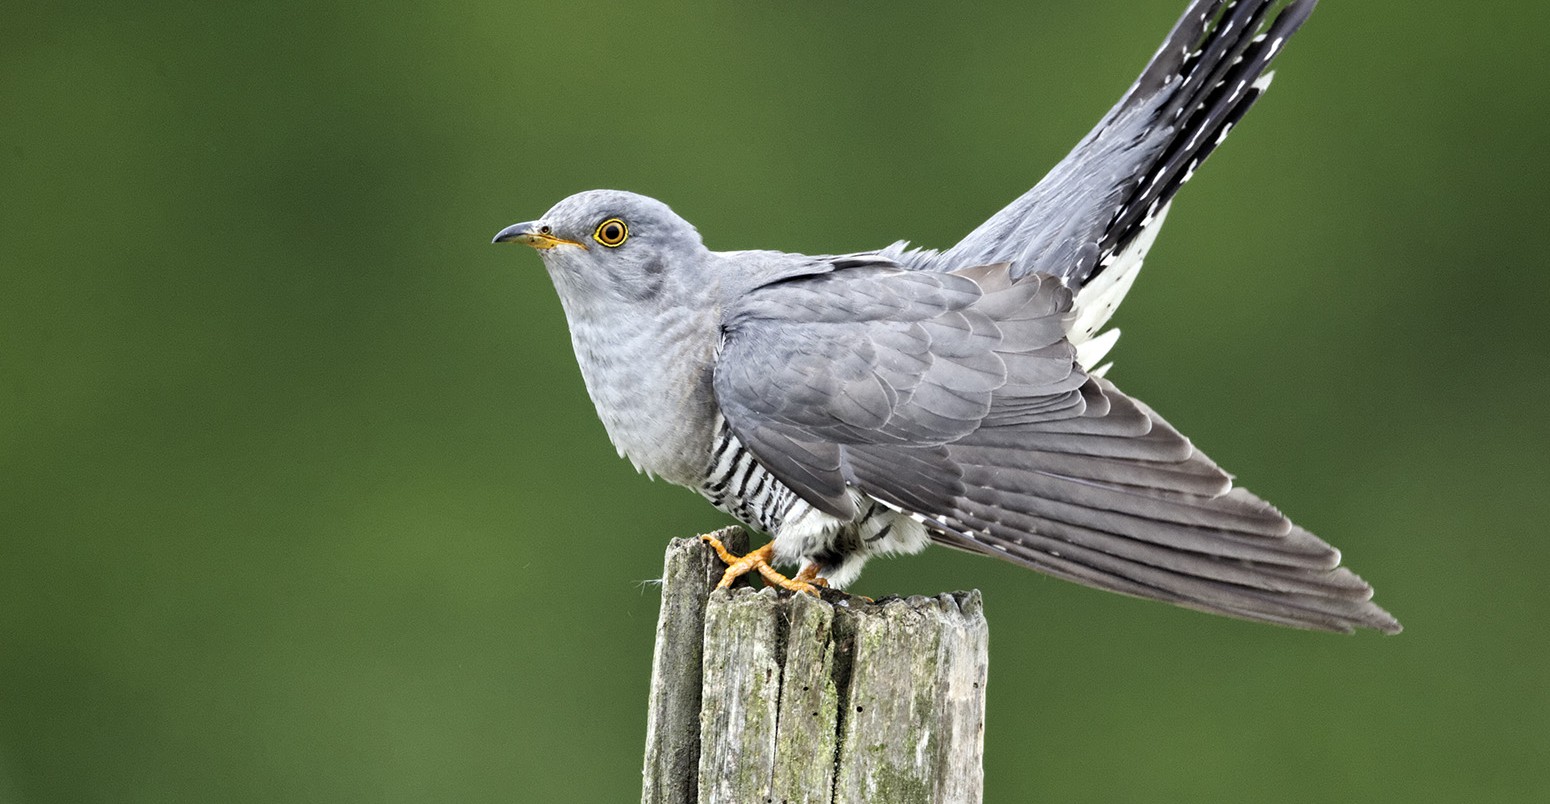 A cuckoo on a post in the Midlands, UK